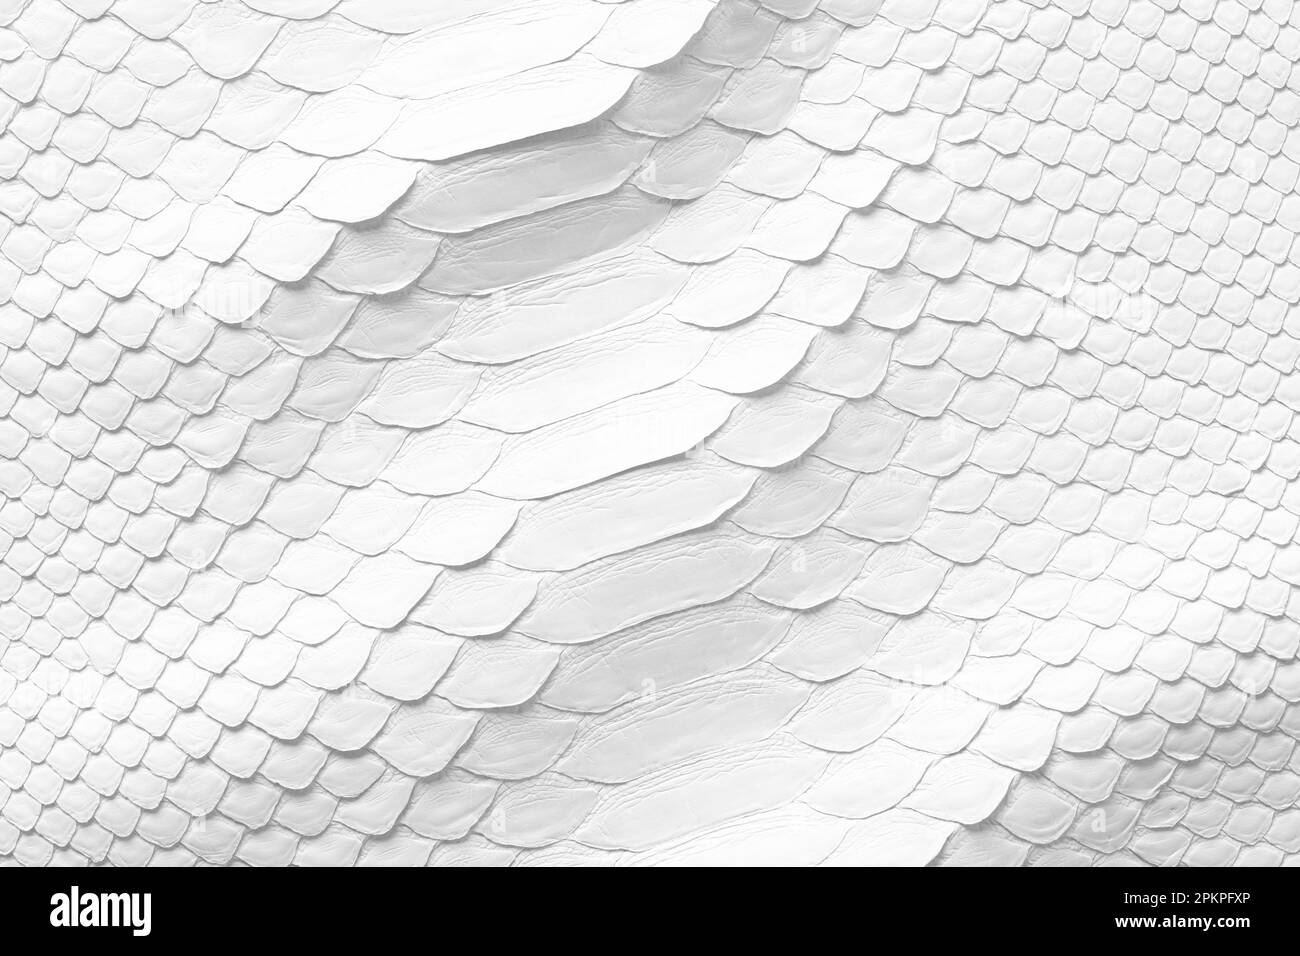 natural snake skin texture, white leather background Stock Photo